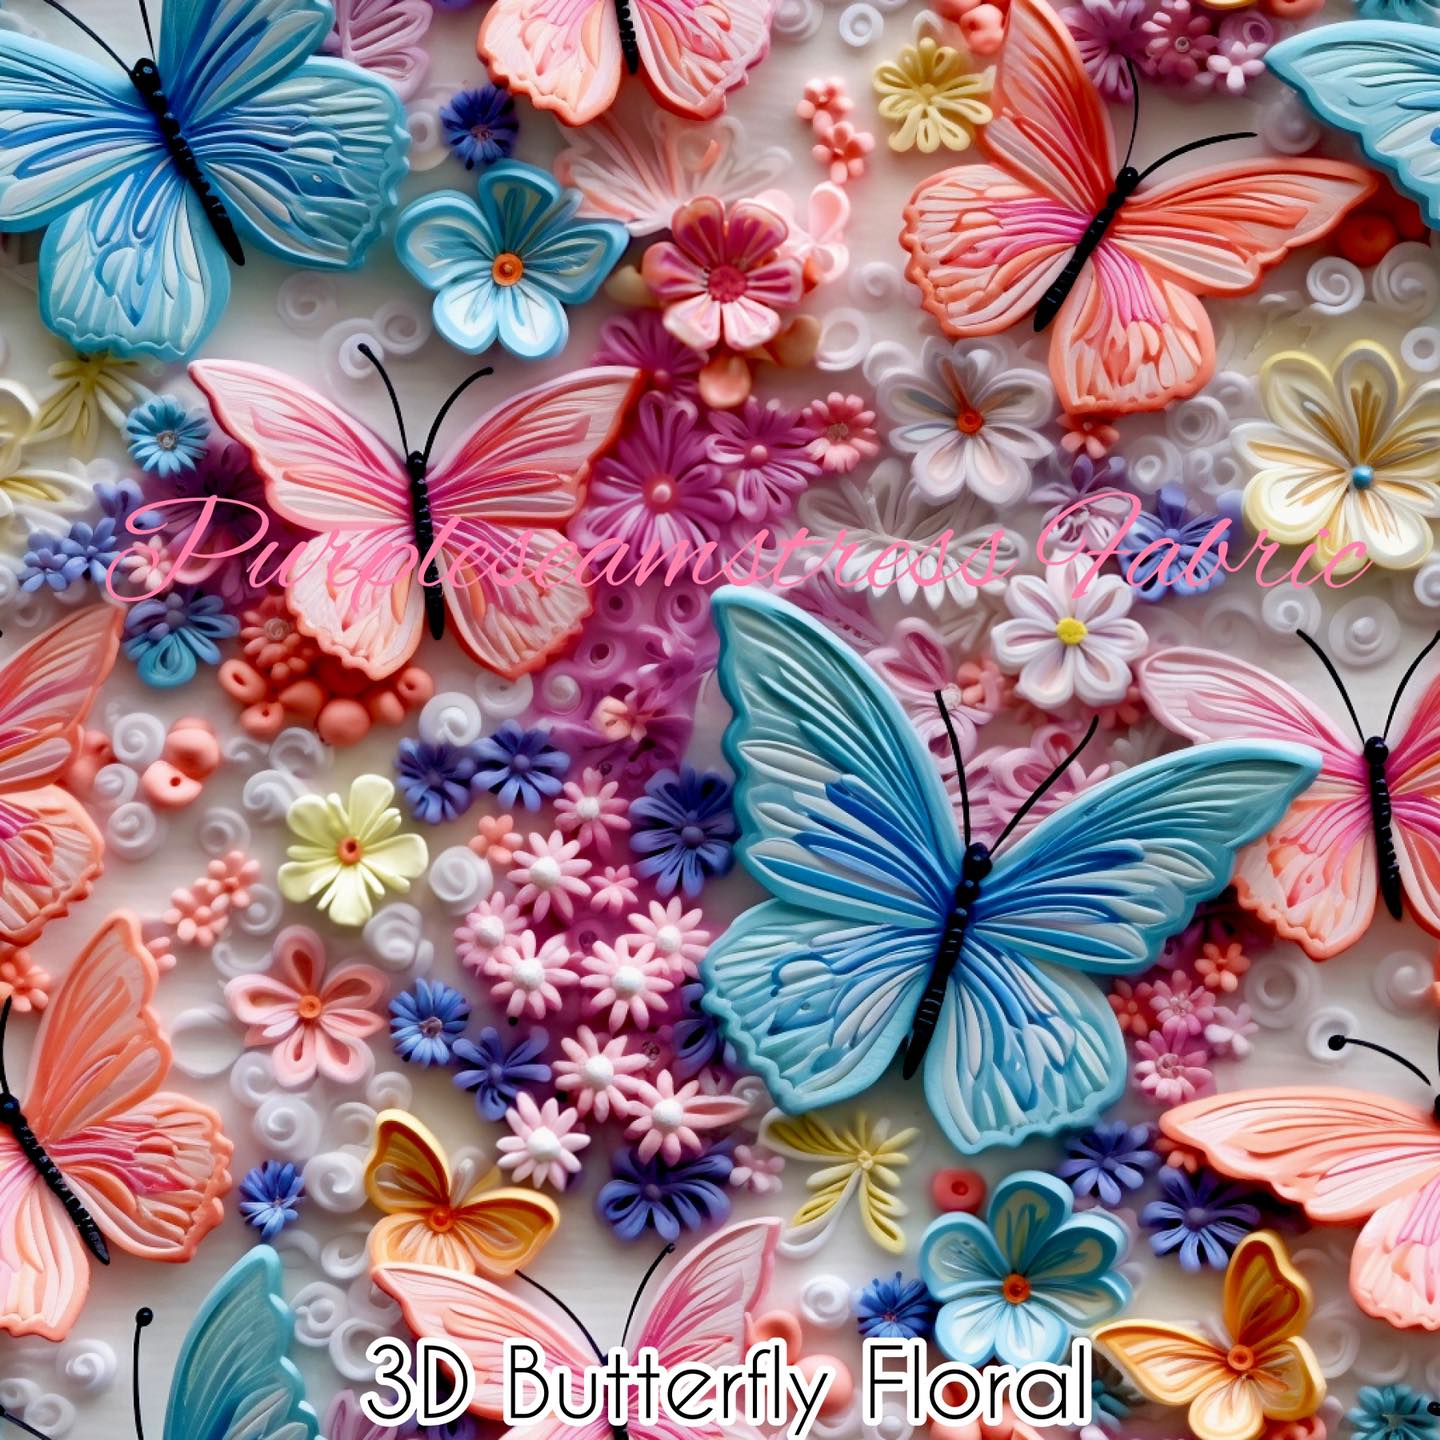 3D Butterfly Floral – Purpleseamstress Fabric